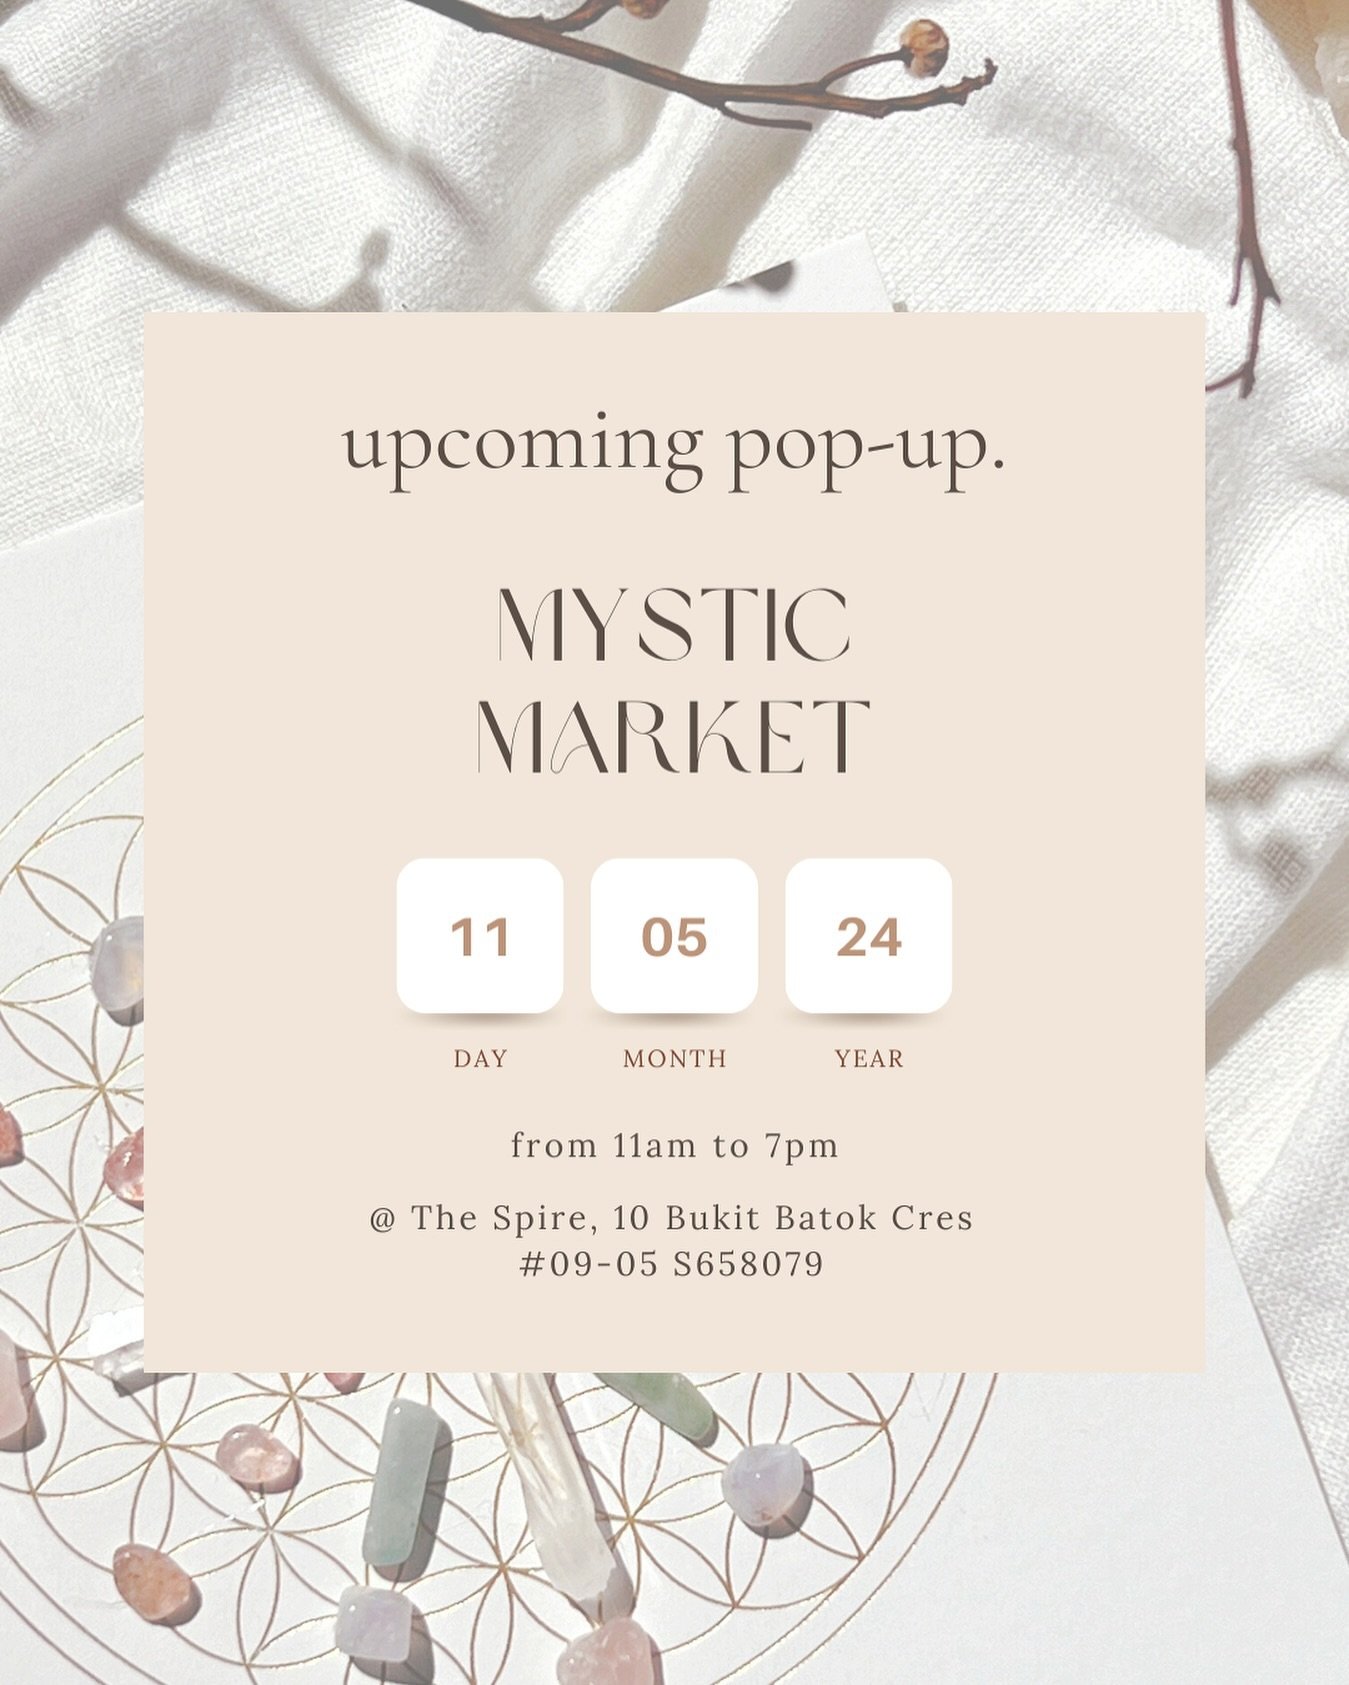 We are going to be at Mystic Market alongside some of the other amazing vendors in the spiritual/wellness realm!! We&rsquo;re really excited for this year&rsquo;s line up and we know you are too! Drop by for chit chats, crystal grids, readings, and m